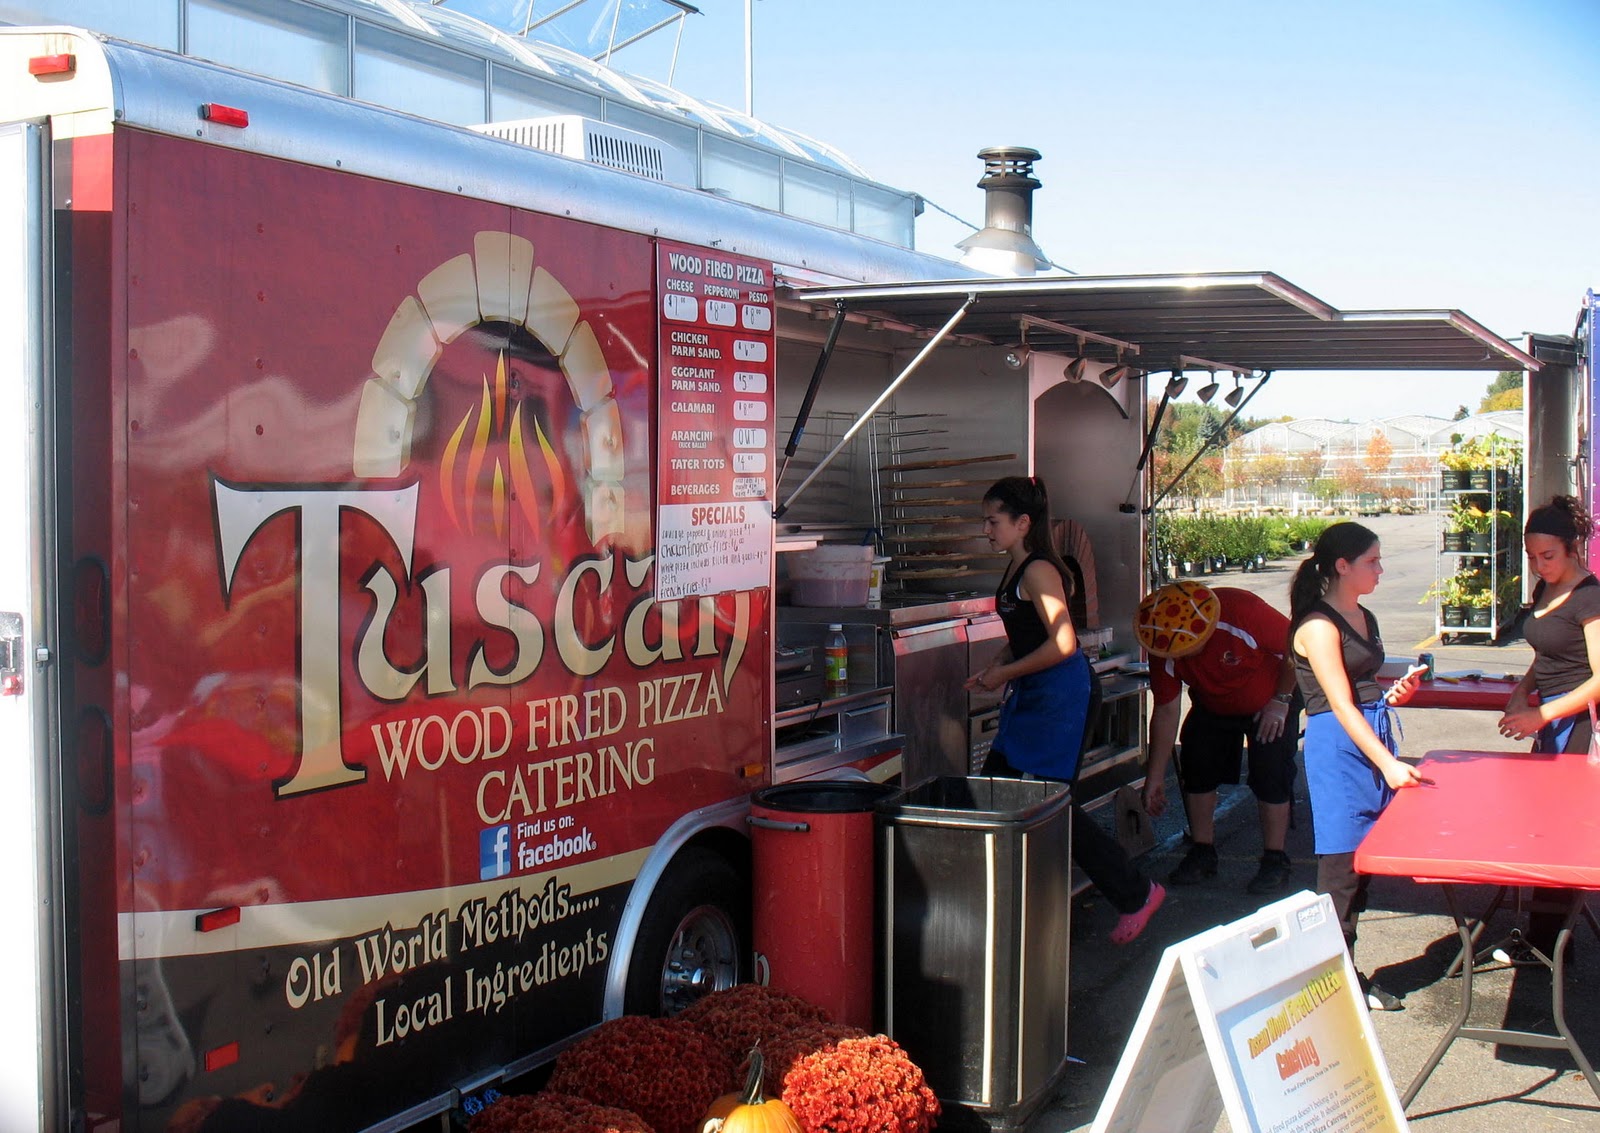 The Rochester Ny Pizza Blog Tuscan Wood Fired Pizza